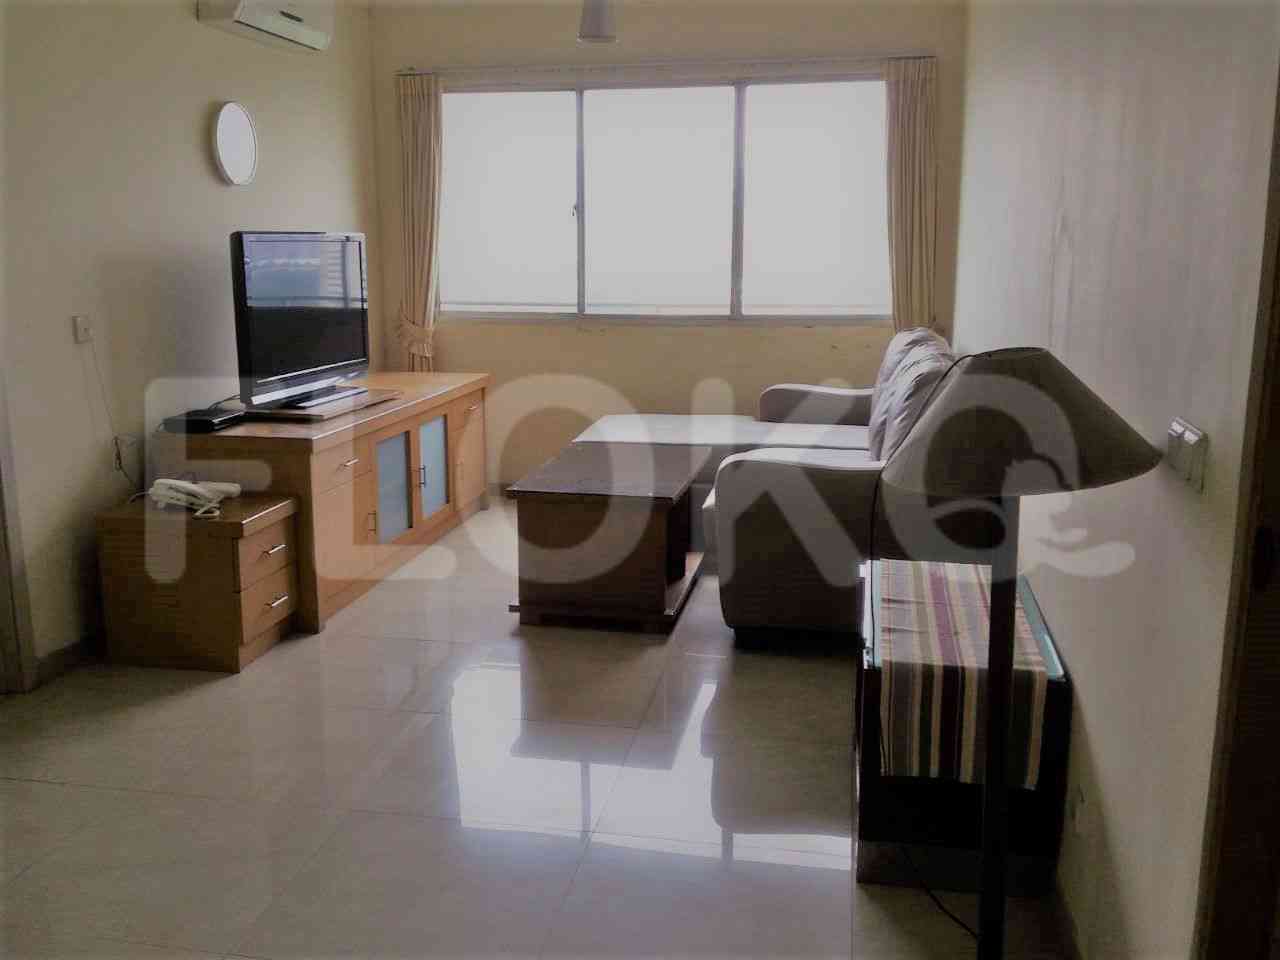 2 Bedroom on 18th Floor for Rent in Permata Senayan Apartment - fpafc3 3